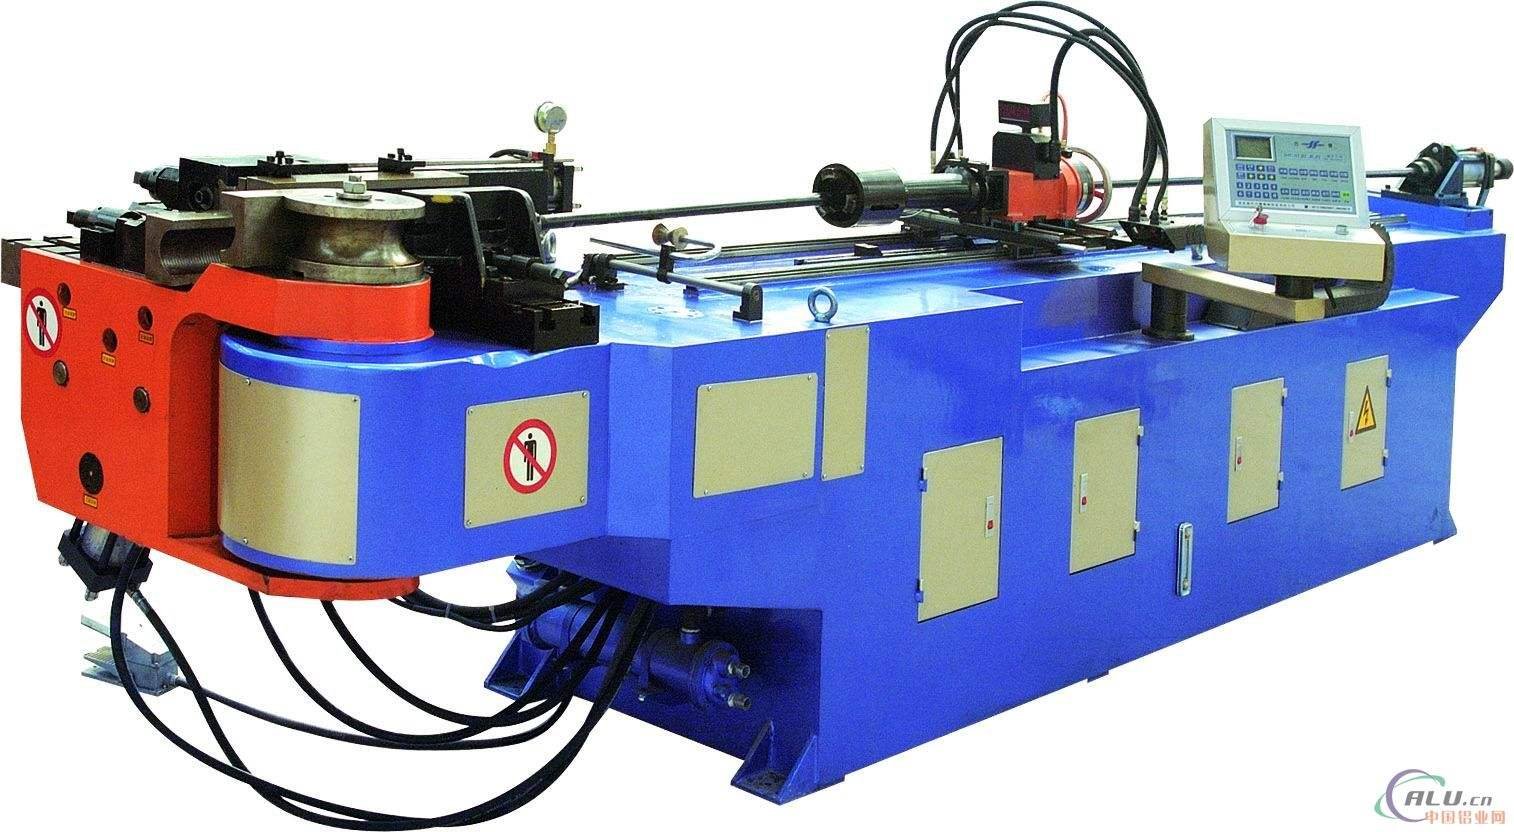 How to use pipe bending machine correctly?